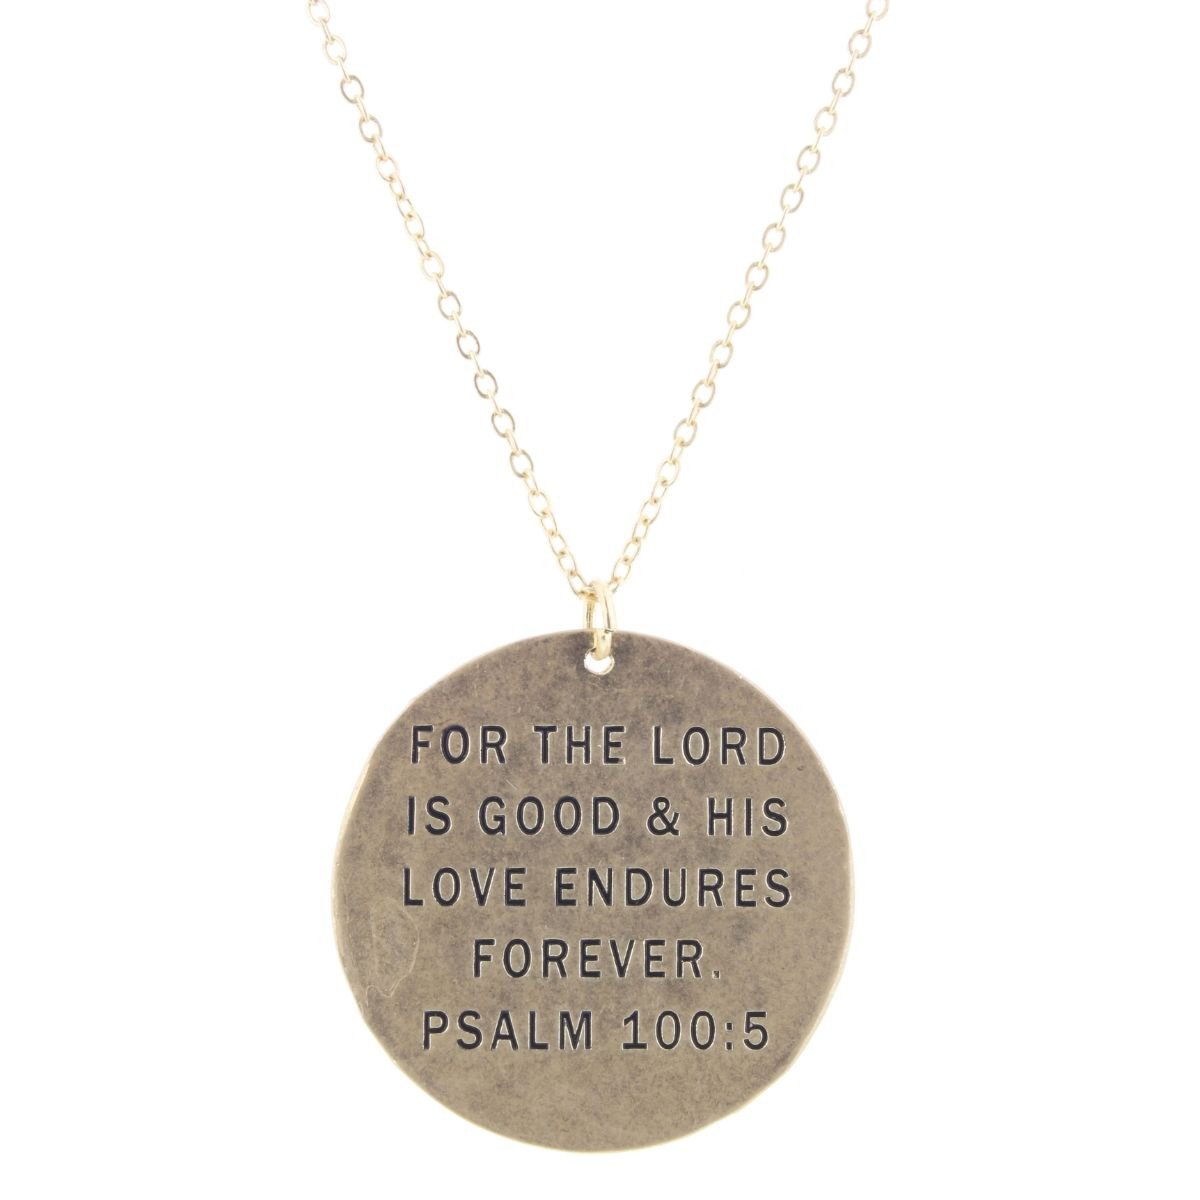 "FOR THE LORD IS GOOD" NECKLACE